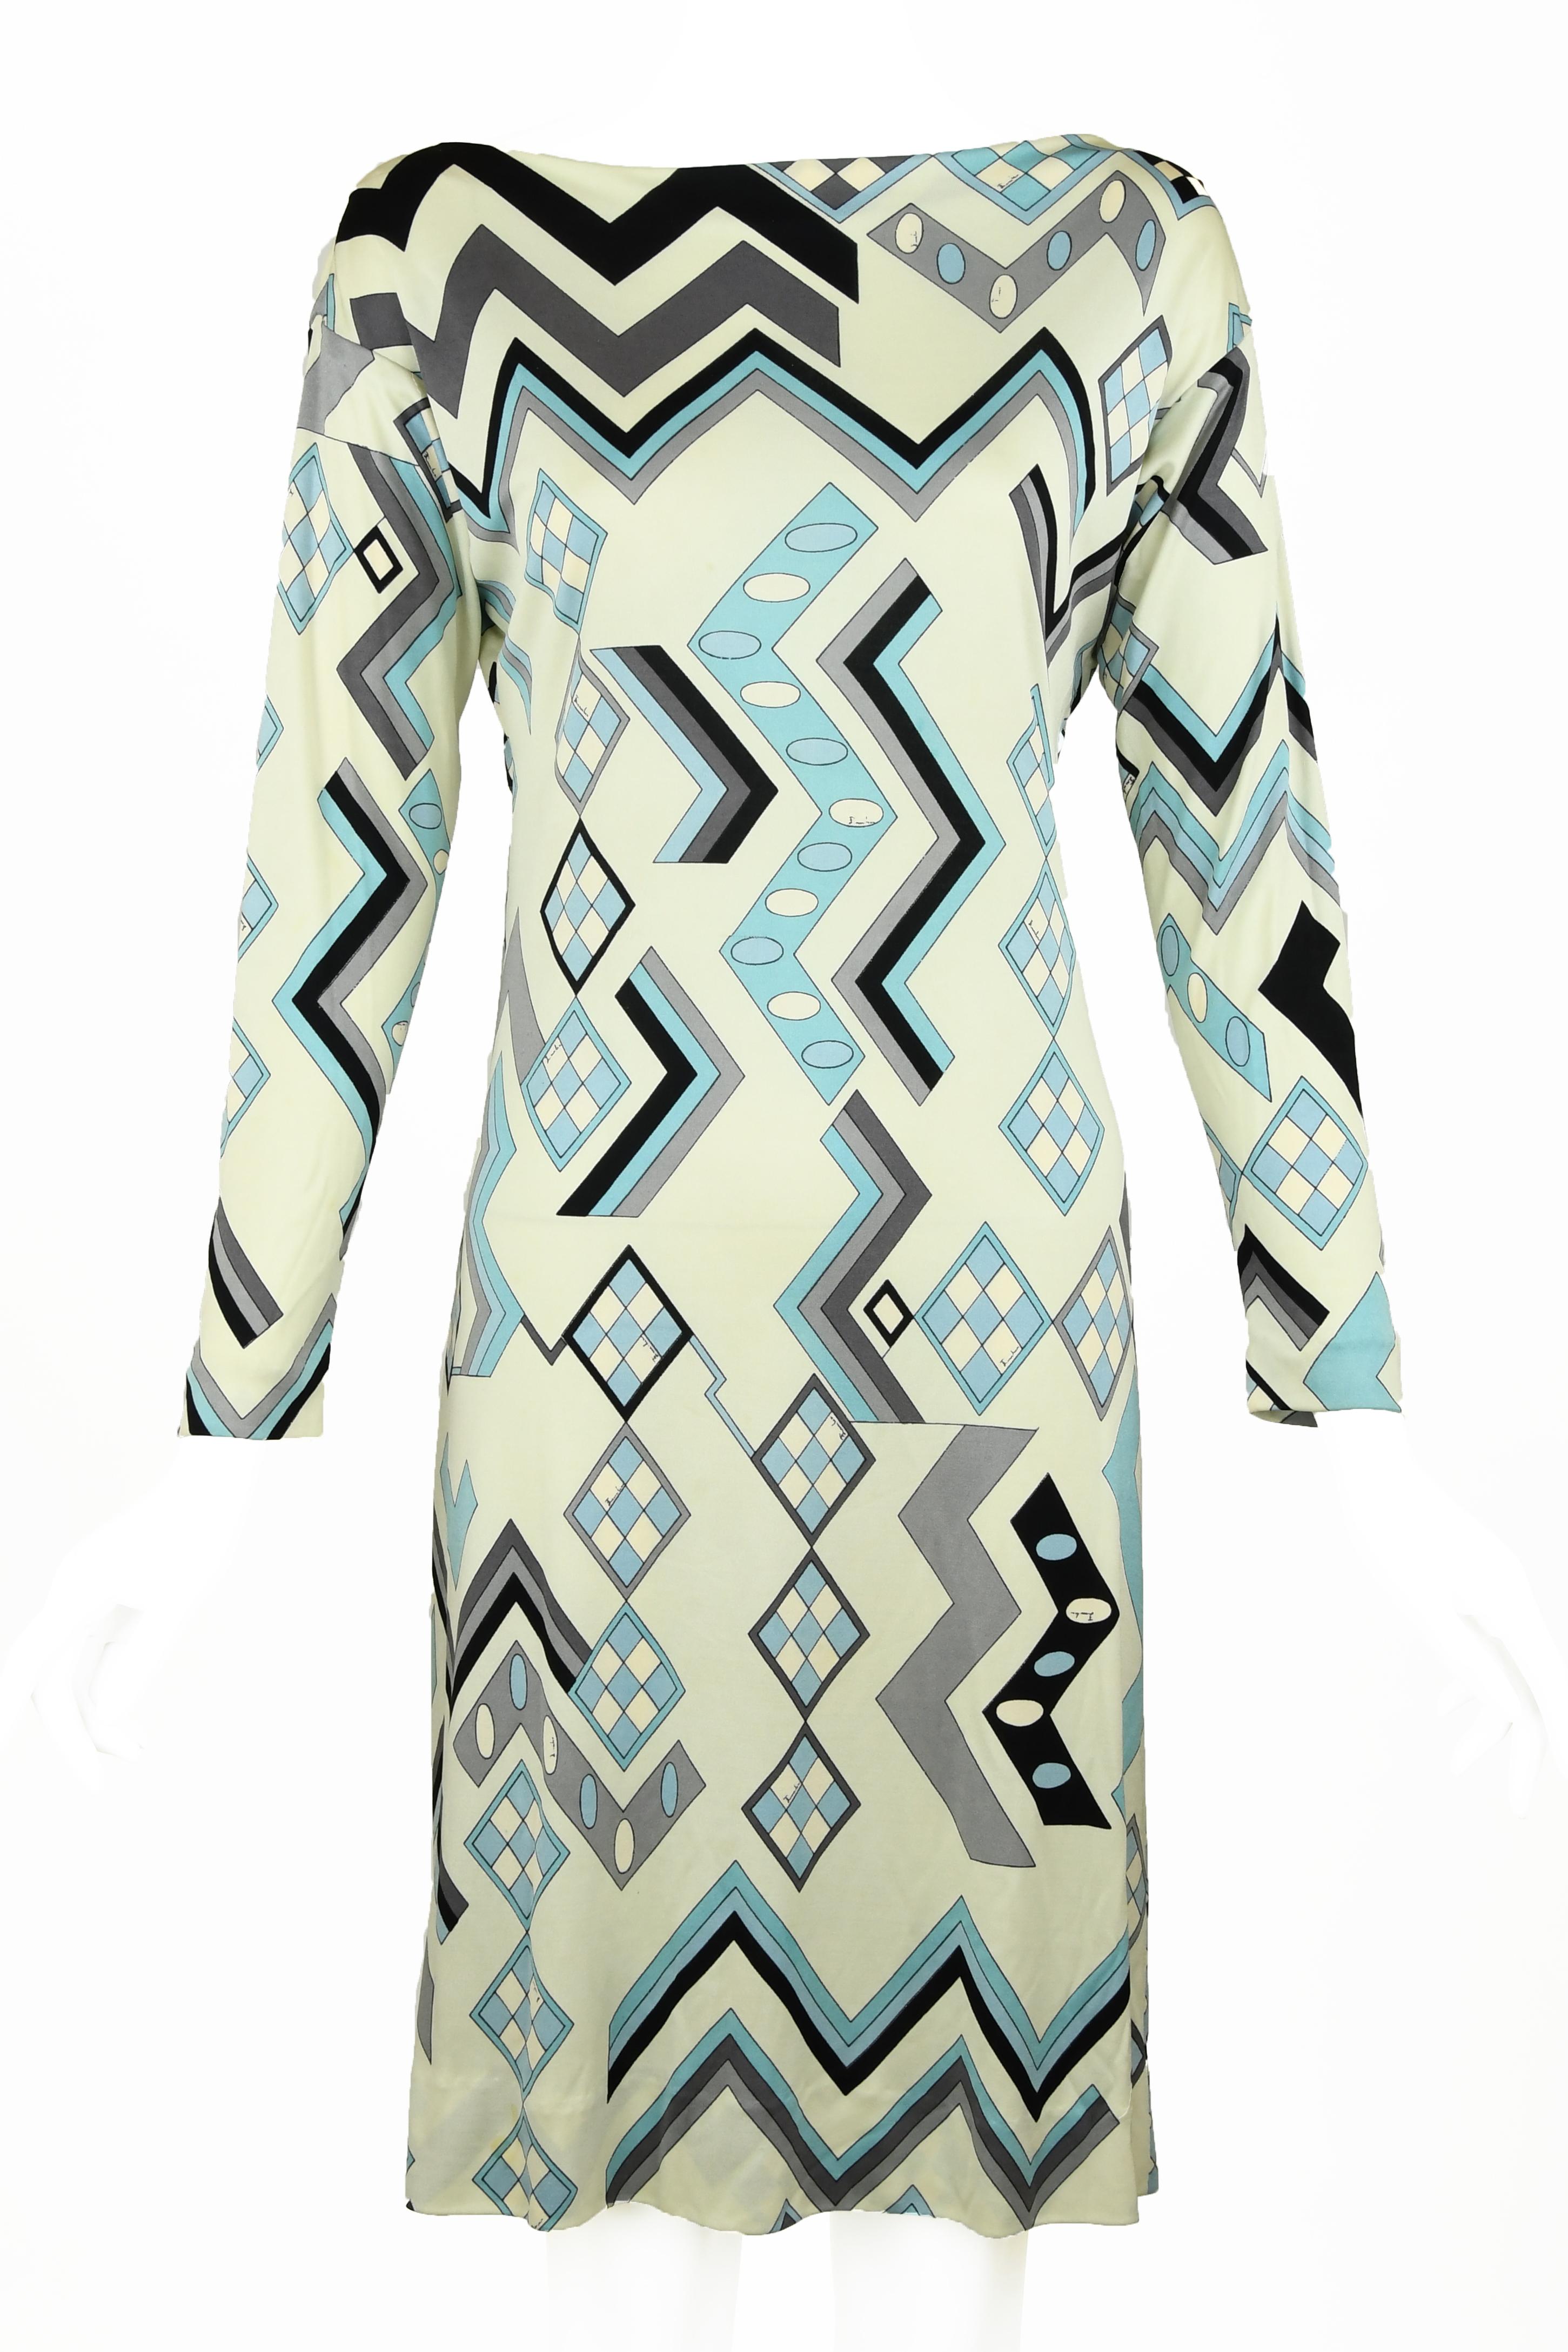 Truly special vintage Pucci dress in soft shades of white, blue and gray.  Features three quarter sleeves and optional belt with delicate and beautiful gold hardware.  This geometrical print is incredible and rare to find such a piece in pristine